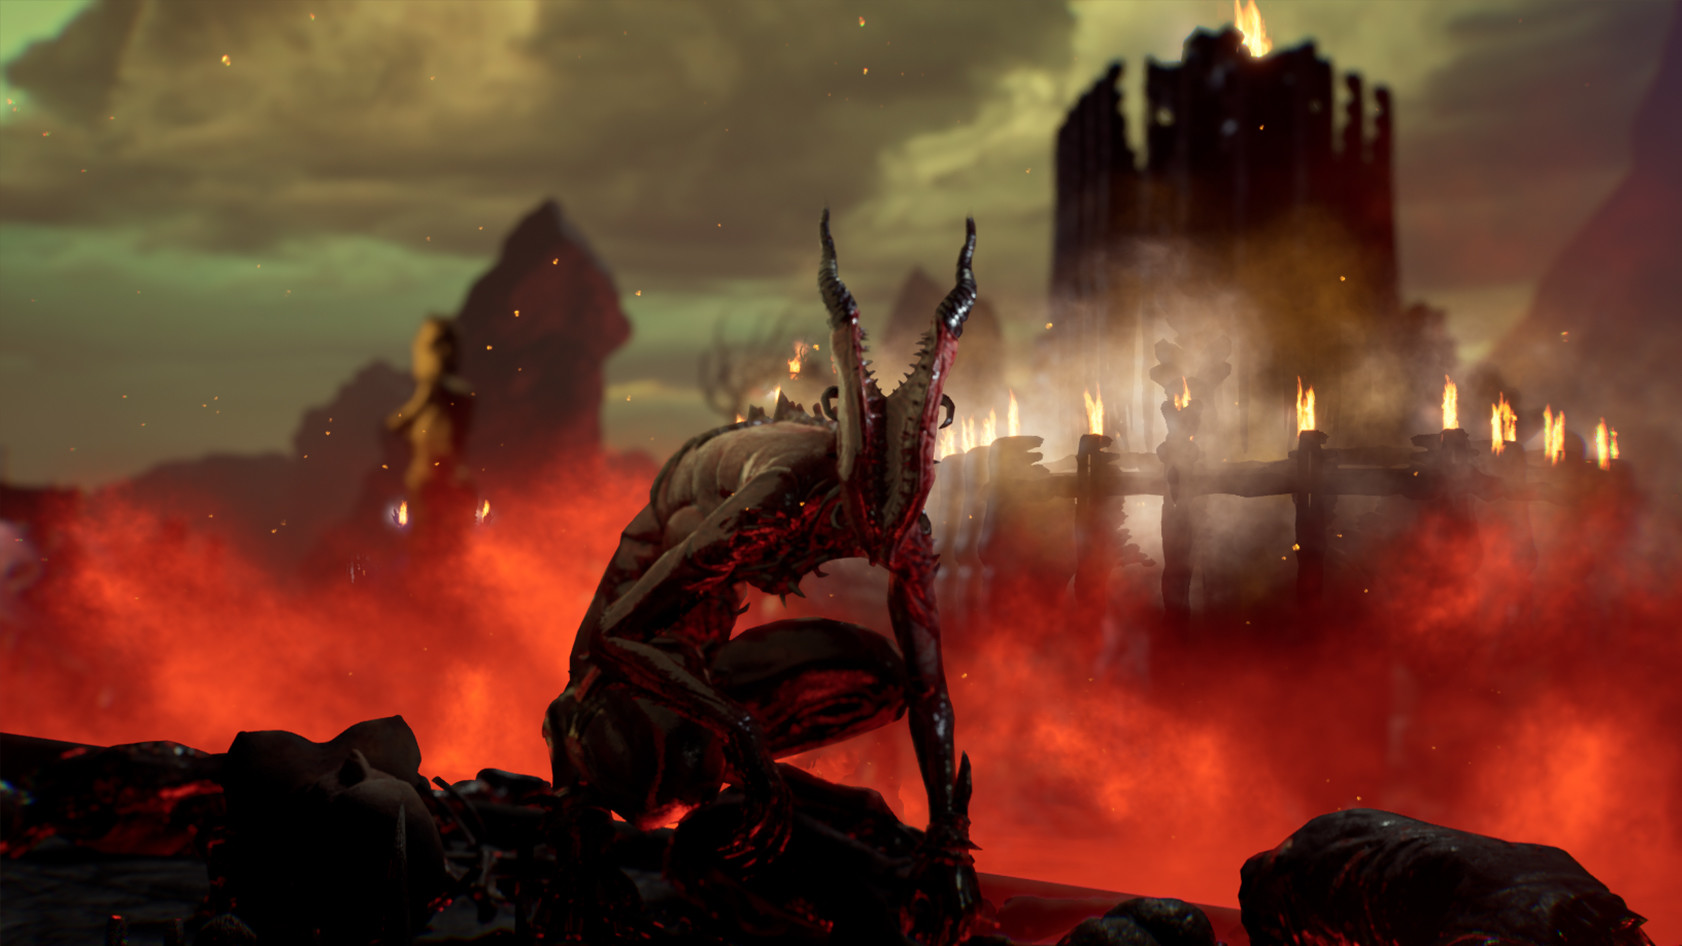 Agony: Lords of Hell, кадр № 1